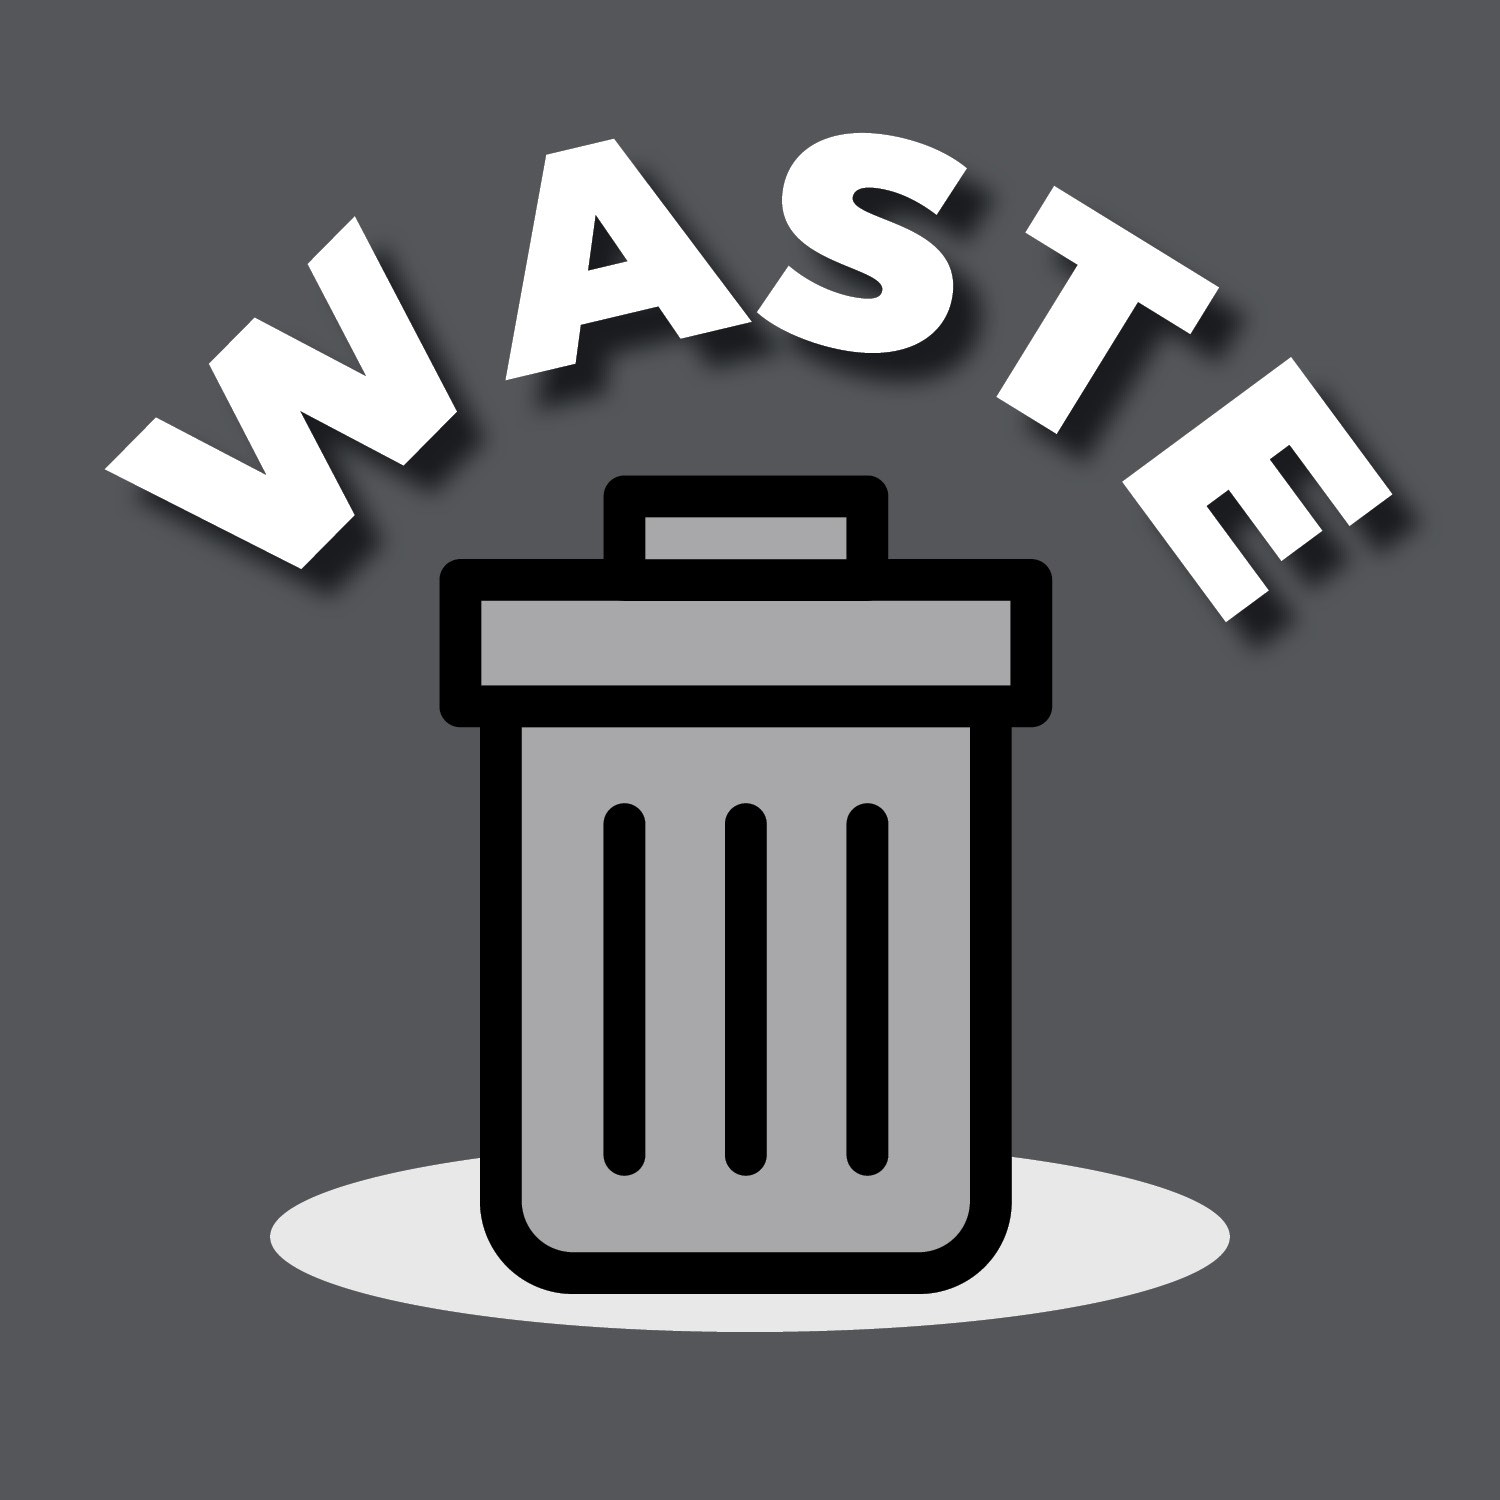 Image of a trash bin with the word "waste" above it.